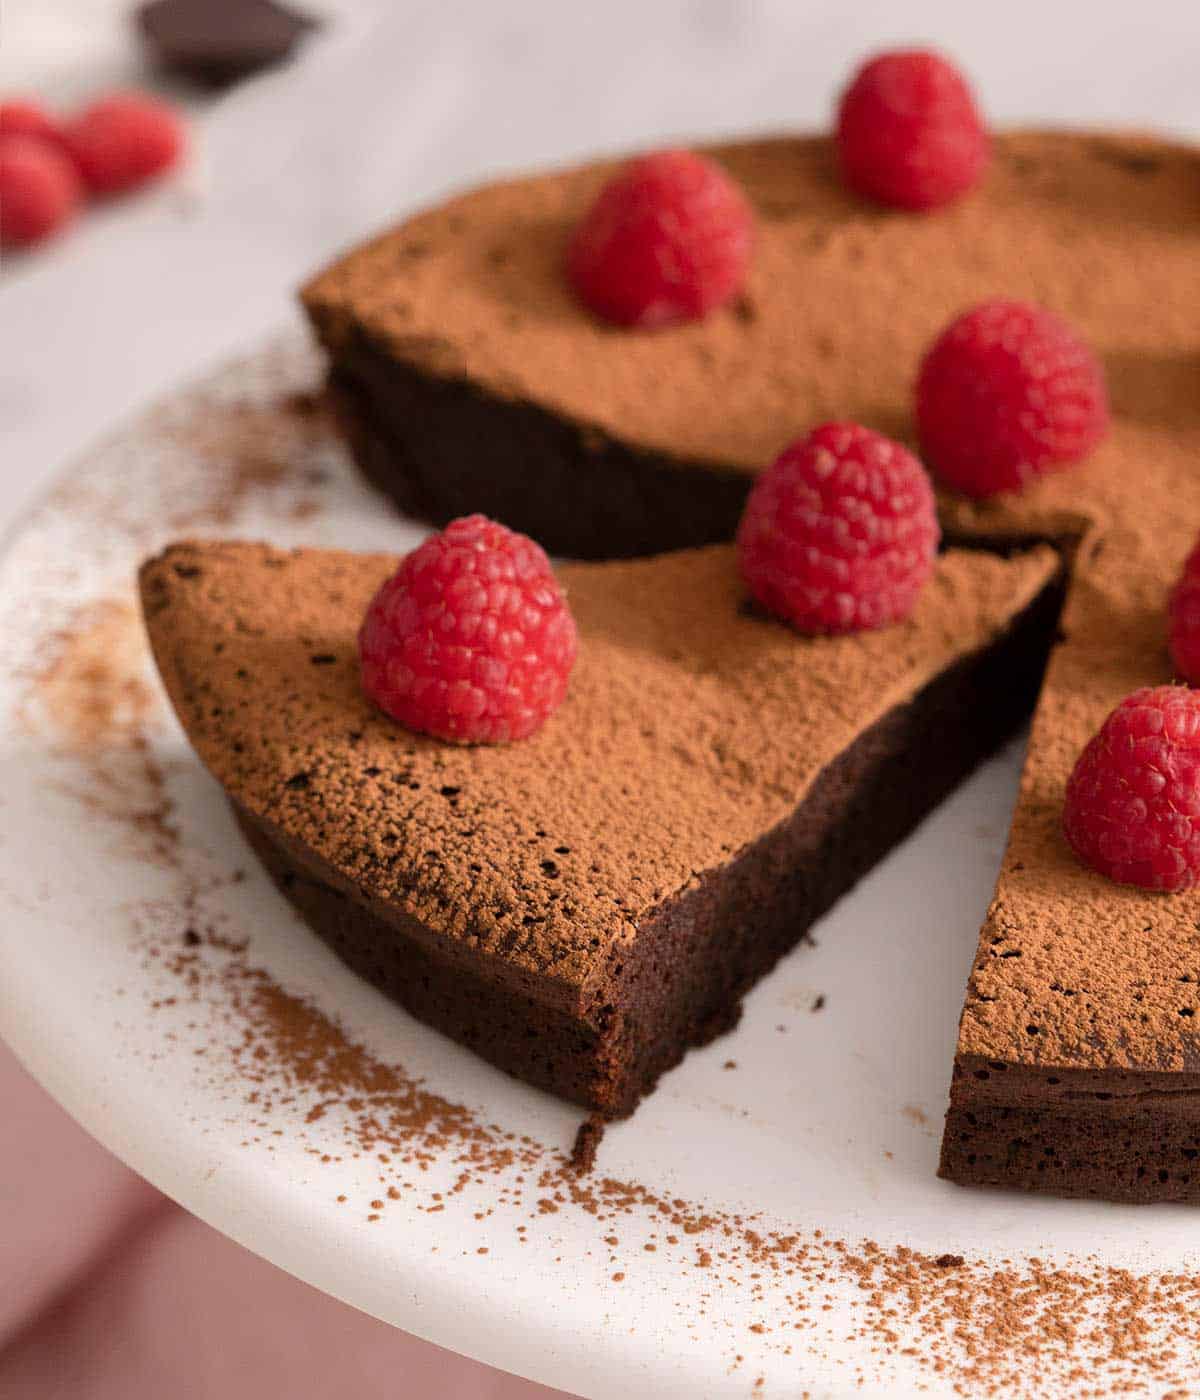 A close up of a slice of chocolate cake topped with raspberries